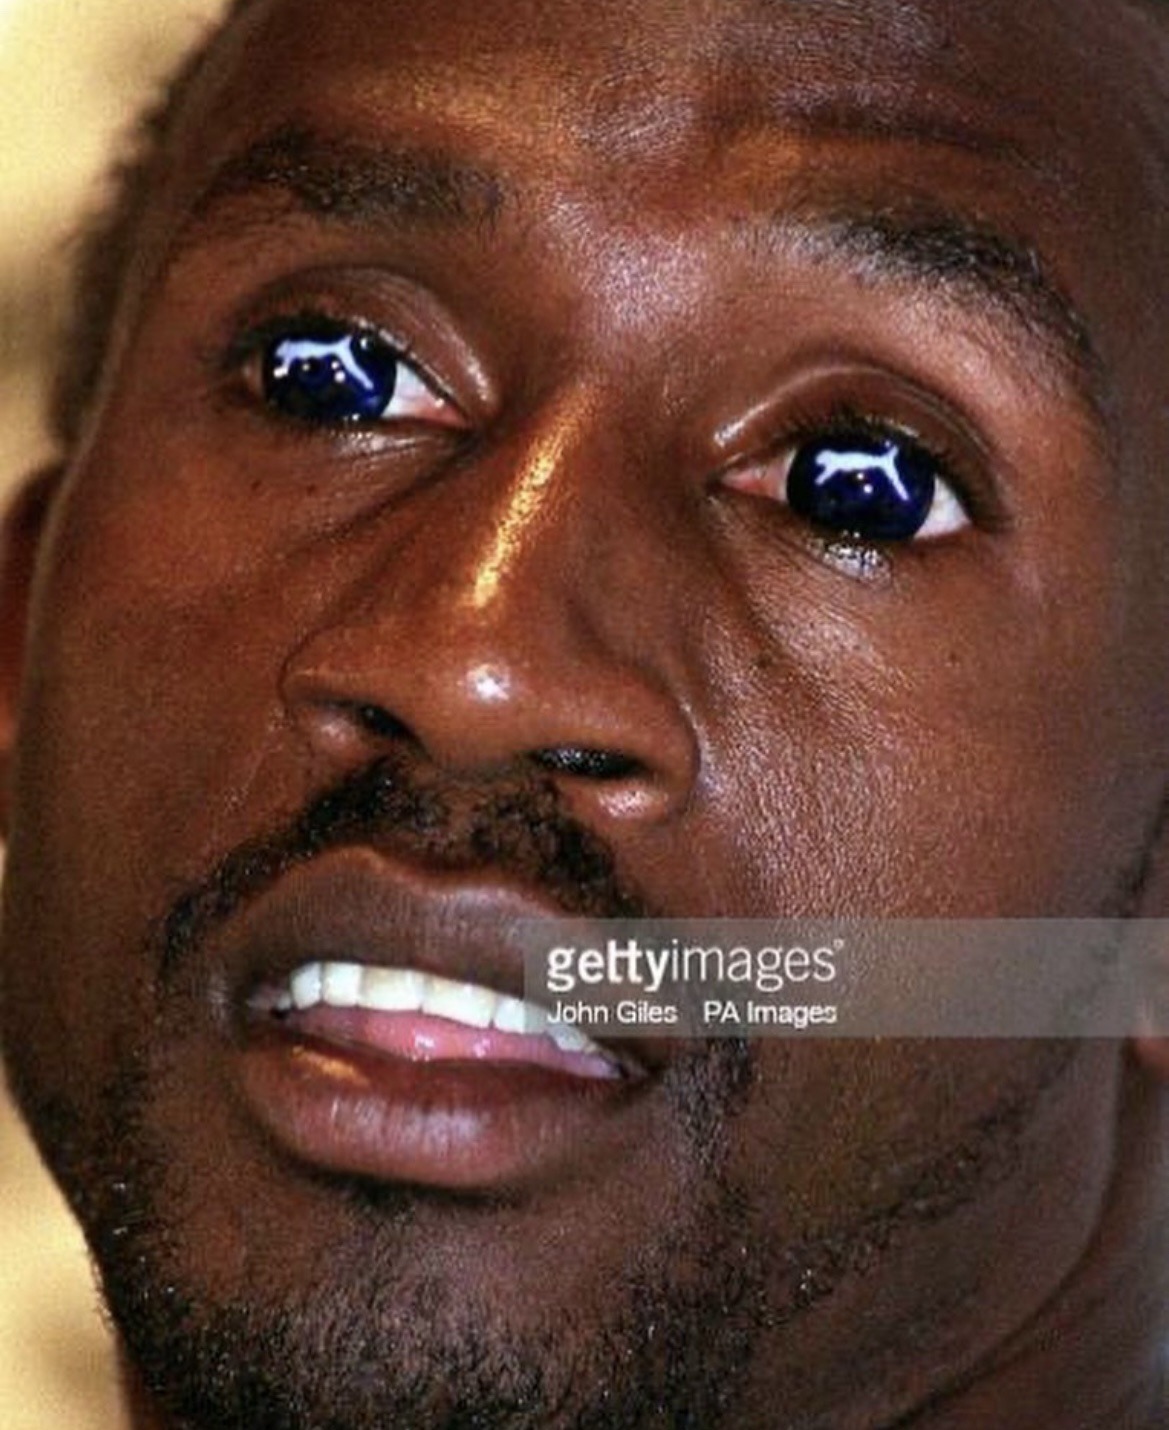 cosmicanger:Track runner Linford Christie wearing Puma contact lenses during the 1996 Olympics in Atlanta 🌺(a Reebok sponsored event btw 🤣)